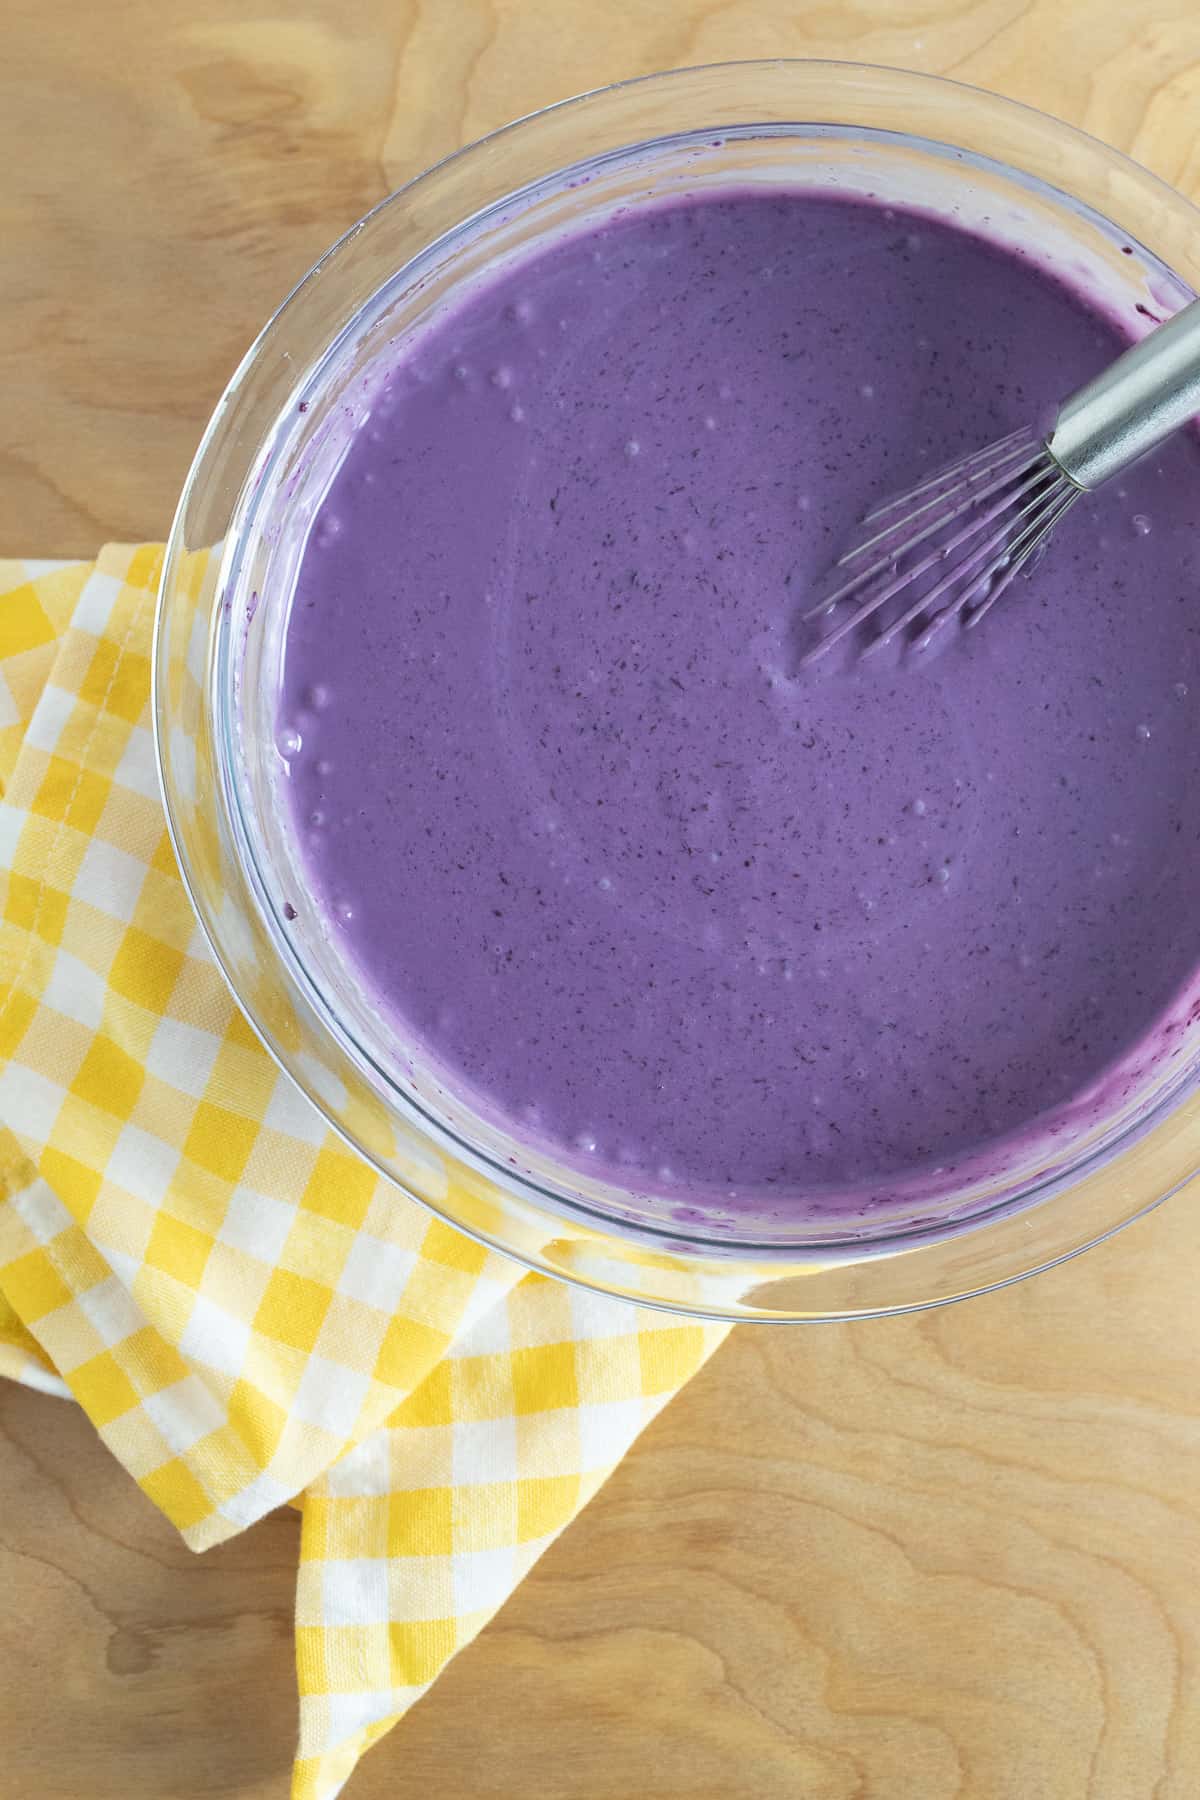 The cream, cooked blueberries, and sweetened condensed milk mixed together in a glass bowl, making a vivid purple mixture.